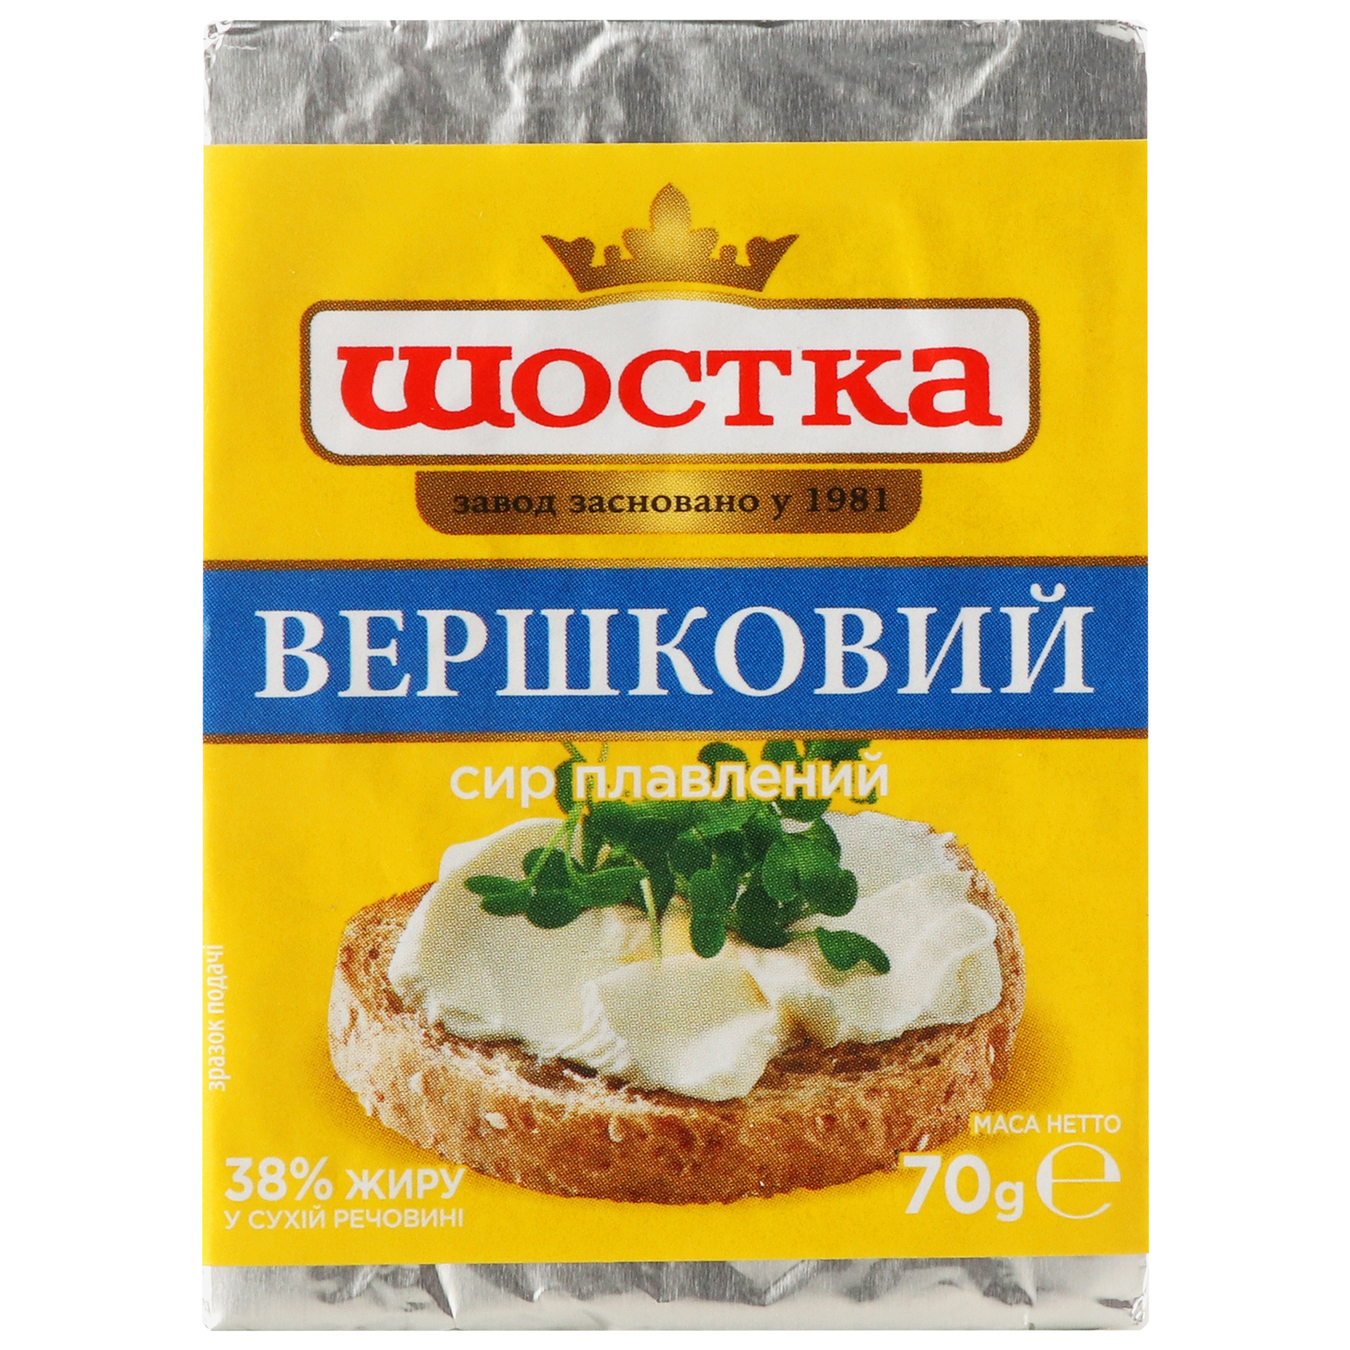 Cheese Shostka melted Creamy 38% 70g